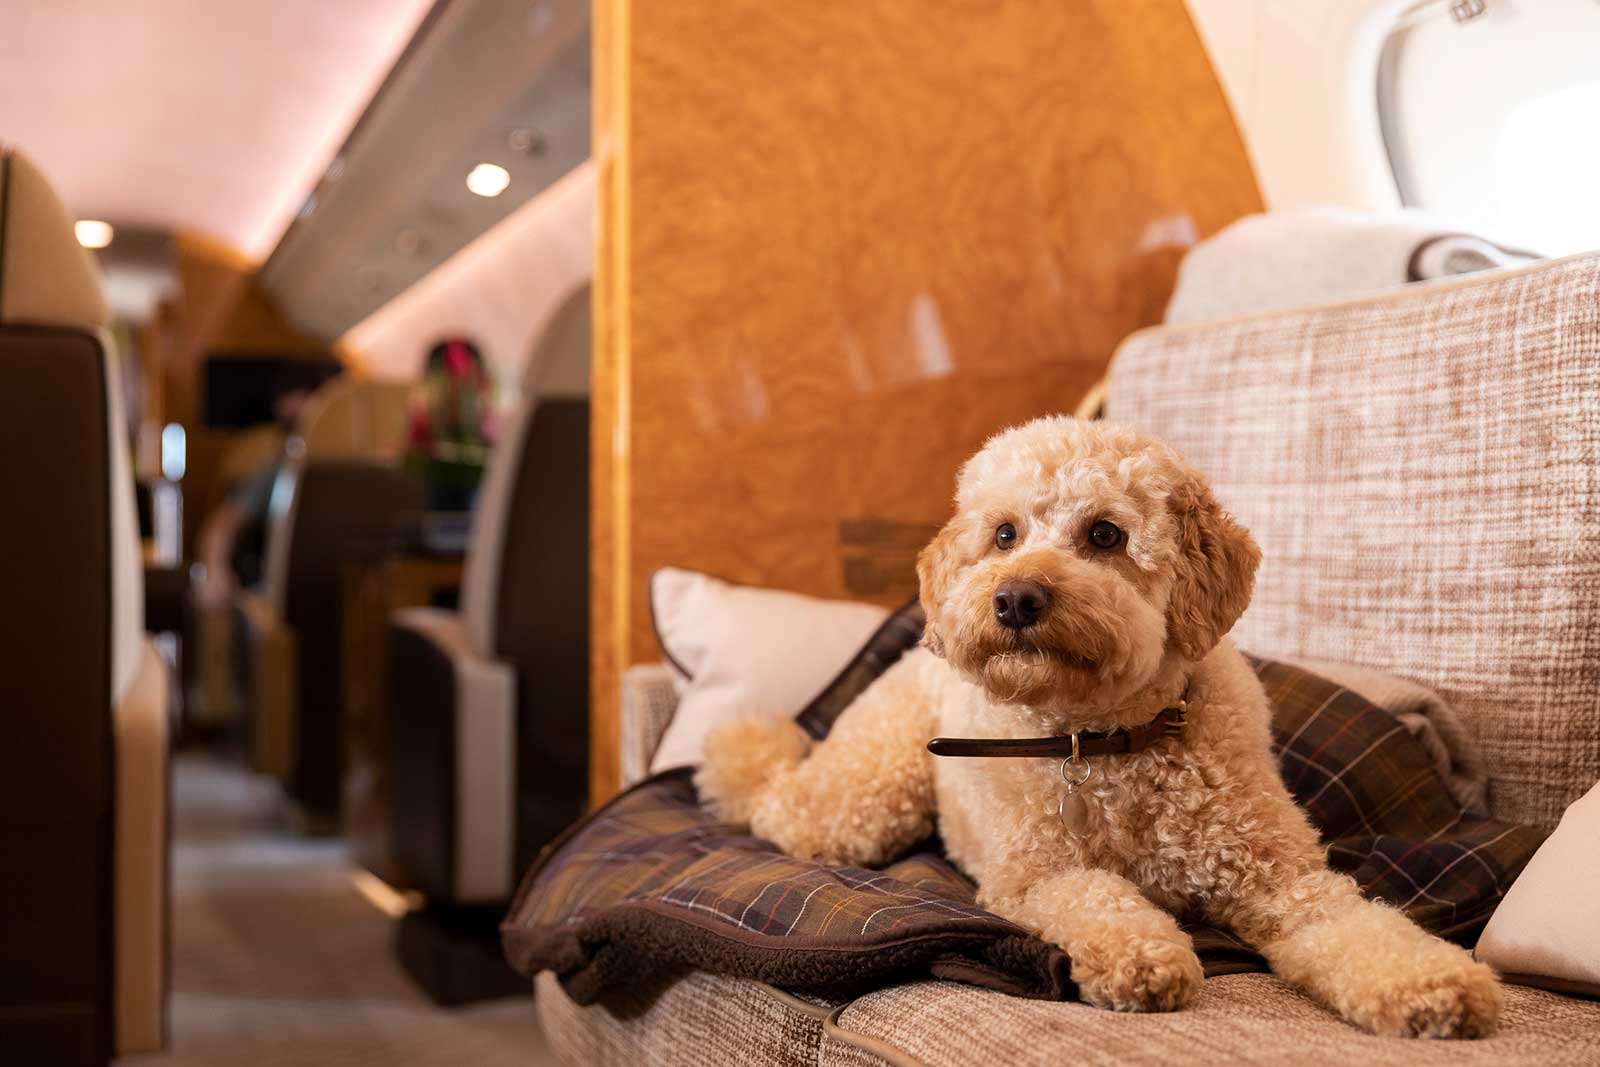 Dog relaxing on private jet